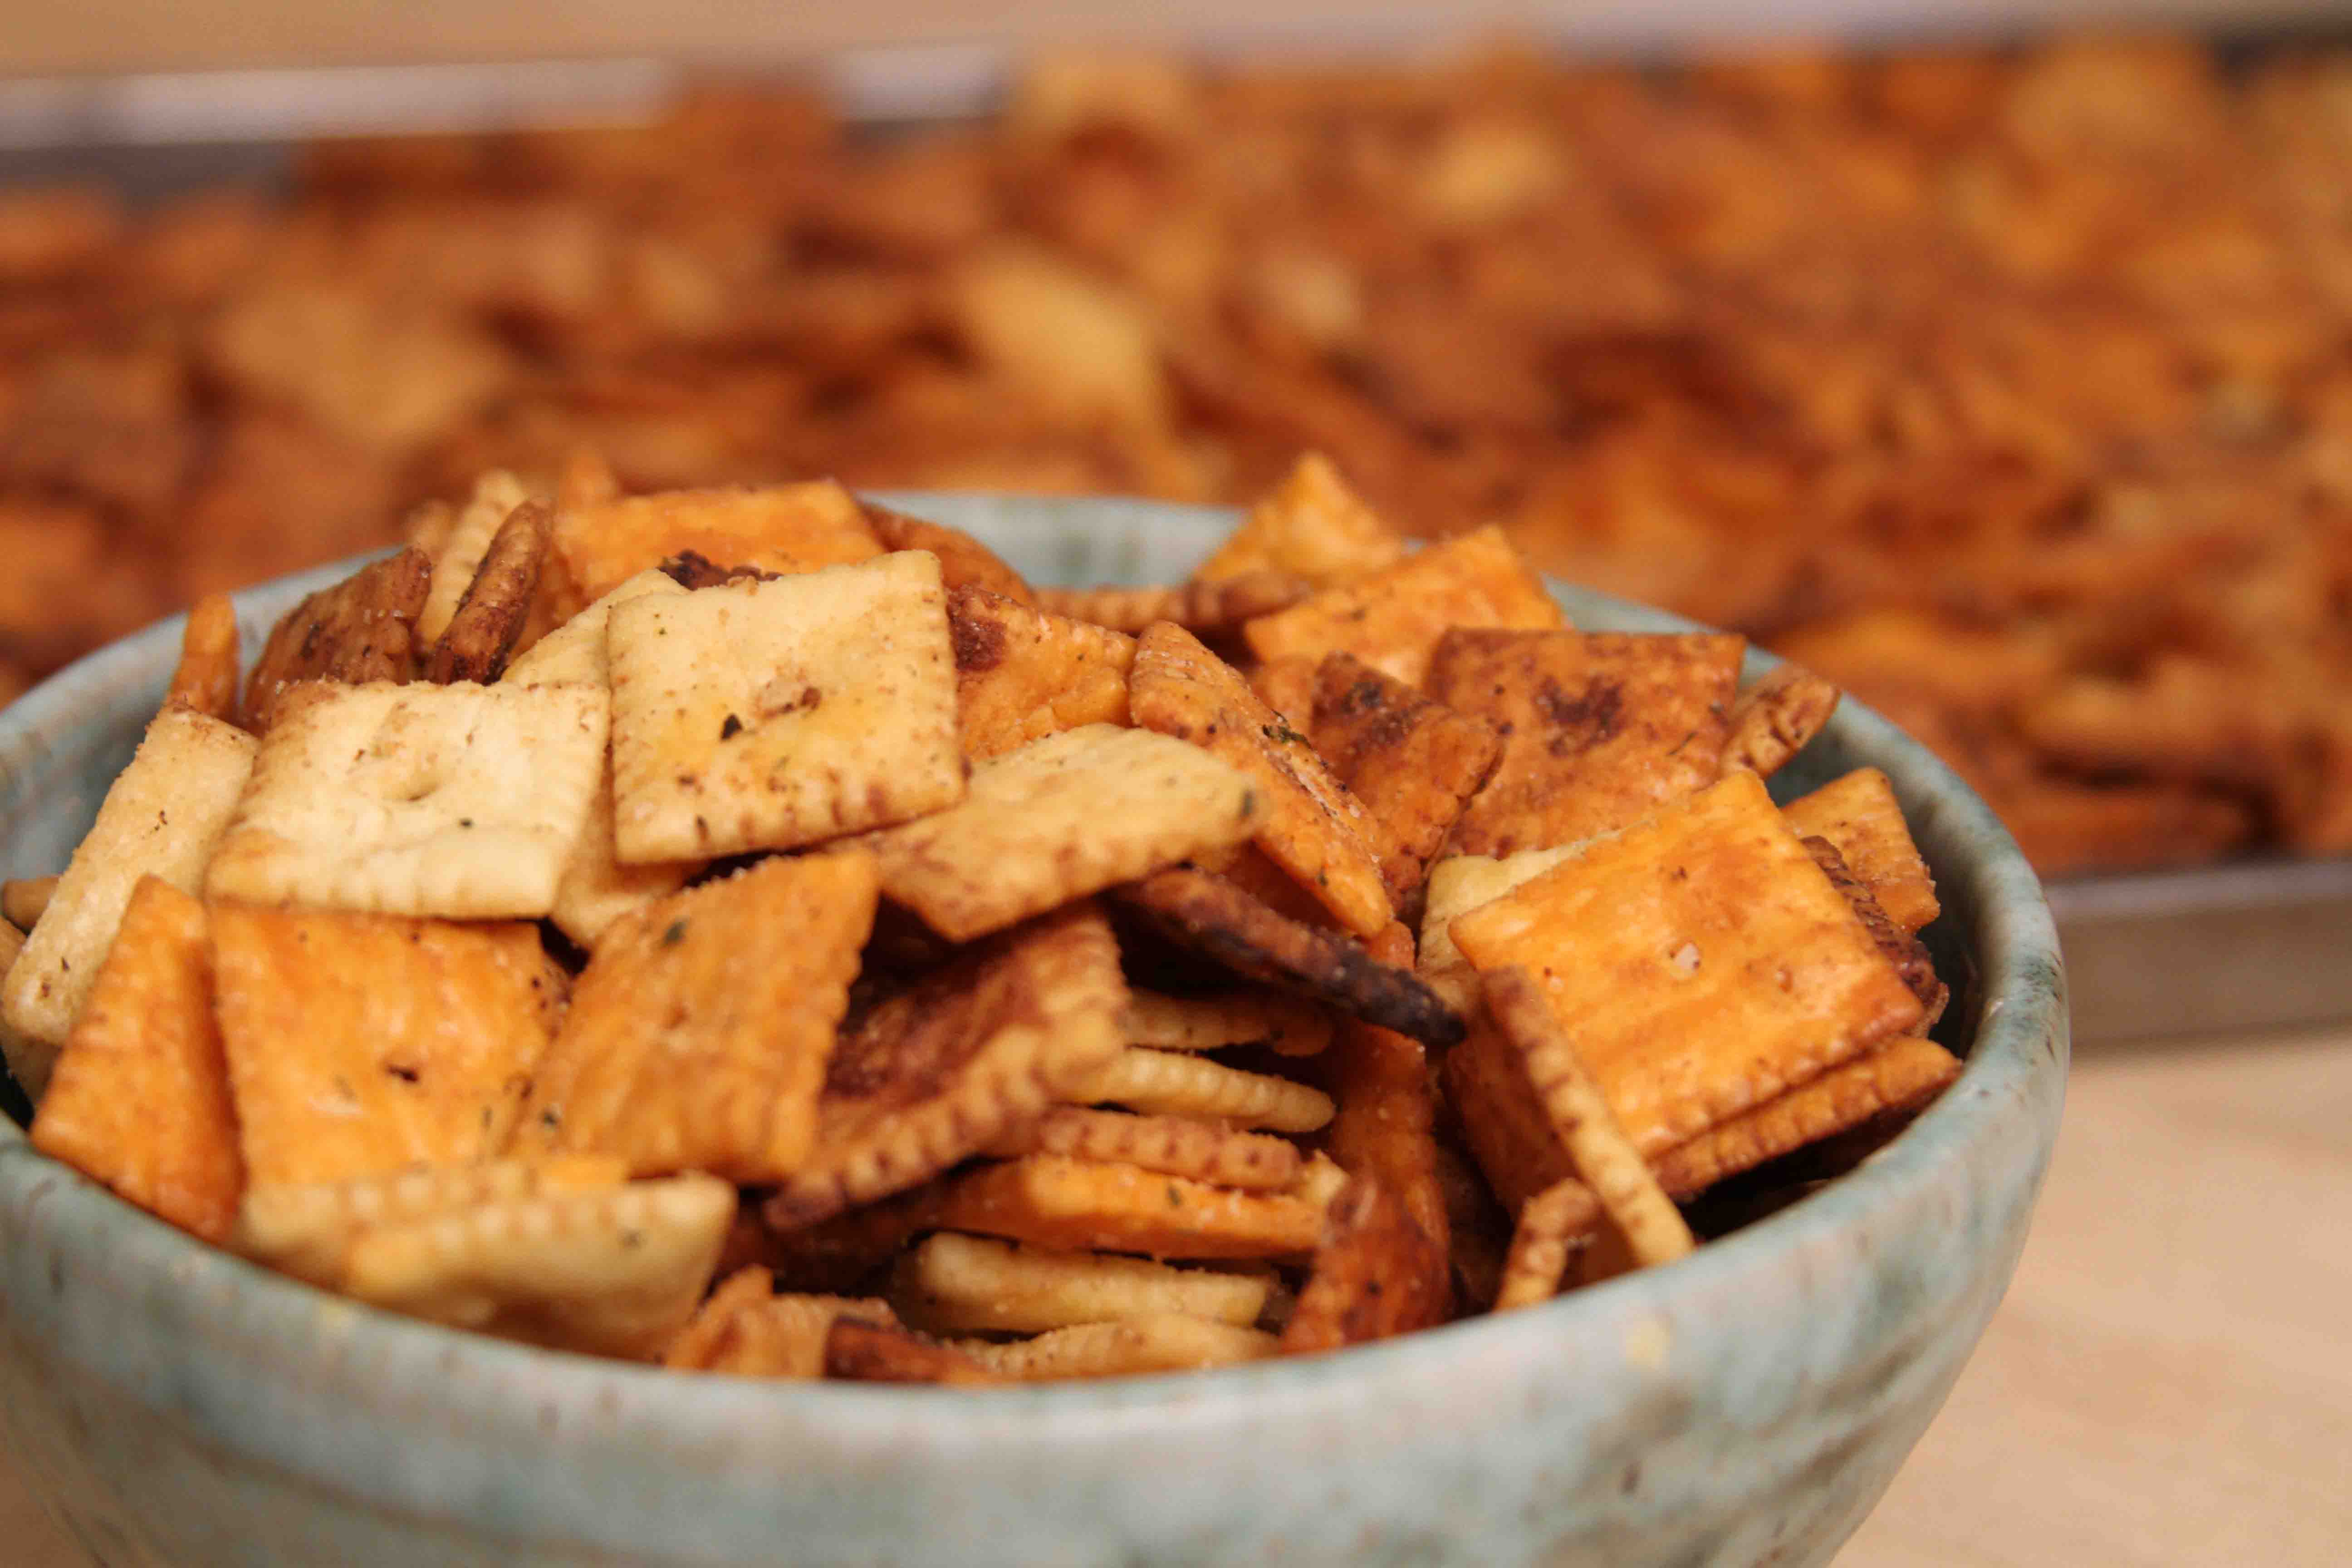 Baked Cheeze-Its